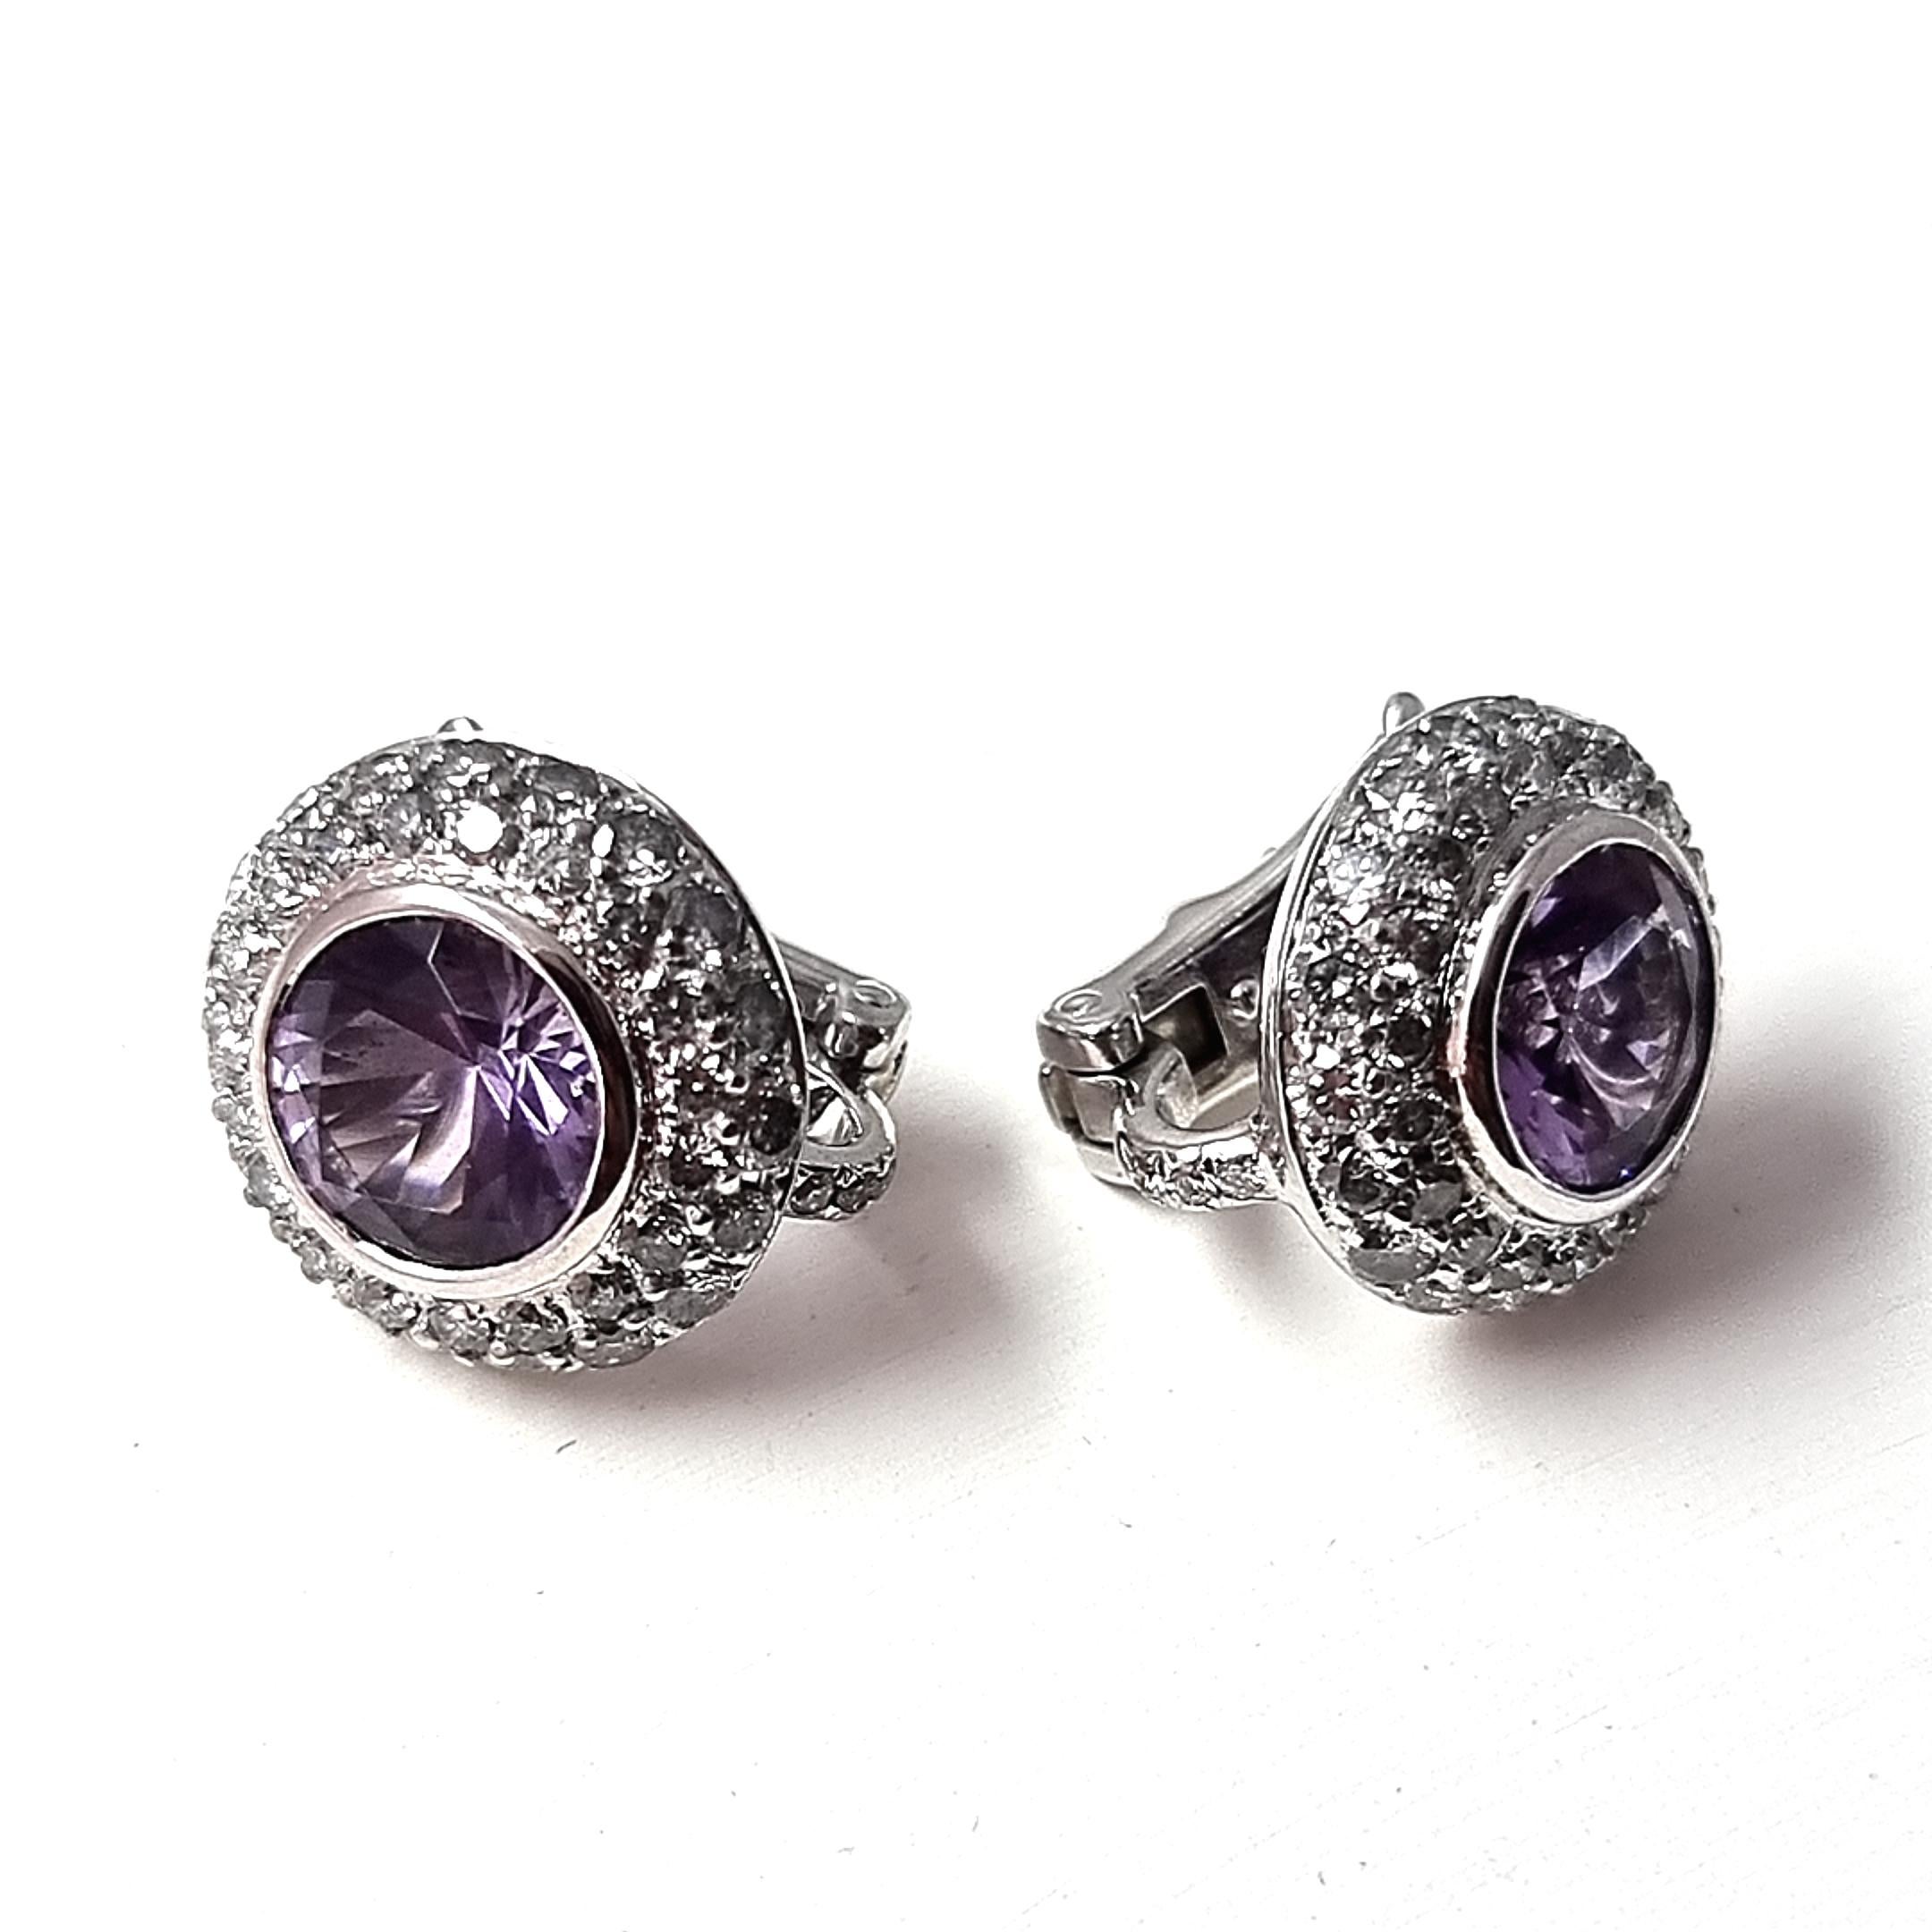 Round Cut Round Amethyst and White Diamonds Set in 18K White Gold Earrings For Sale